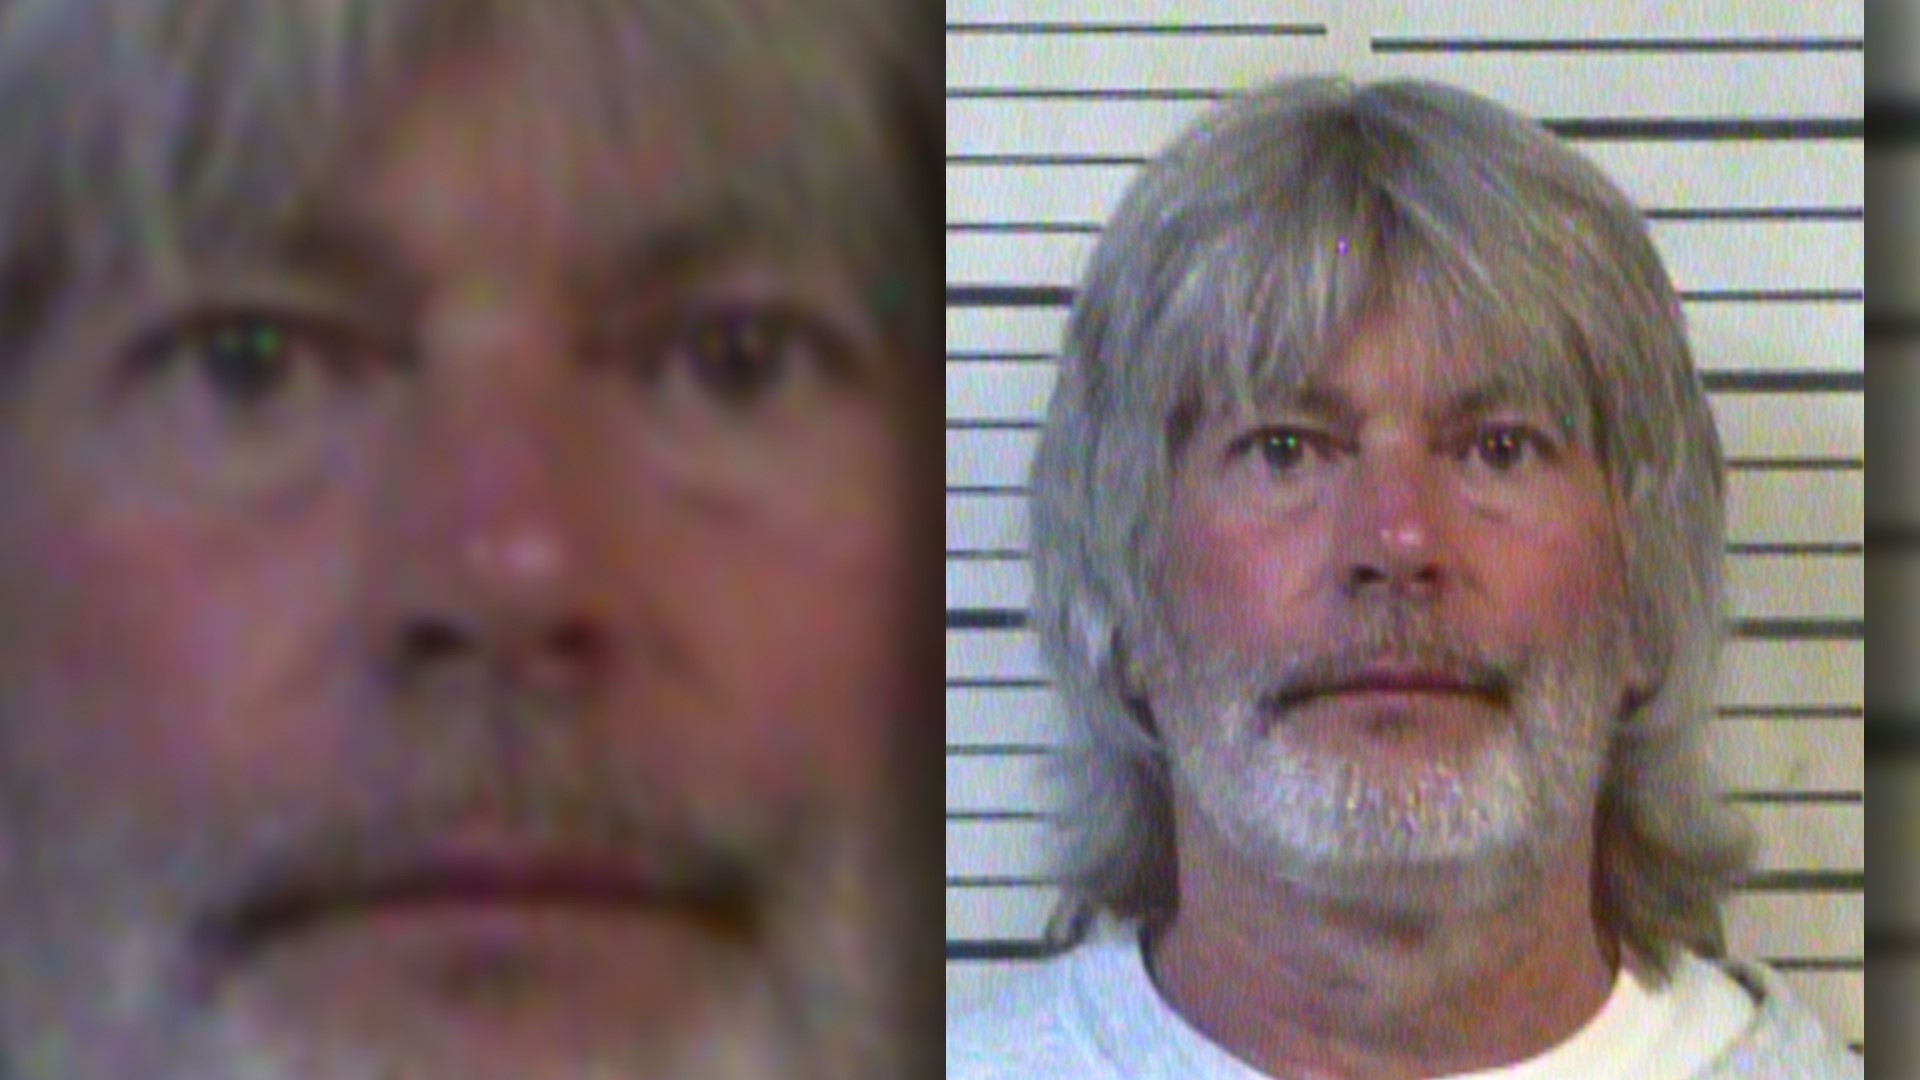 Investigators say George Hardin of Crossville, who is out on parole for first degree murder, kidnapped a Cumberland Co. woman from her home this weekend. The woman got away, but he's on the run, possibly in Clay County.